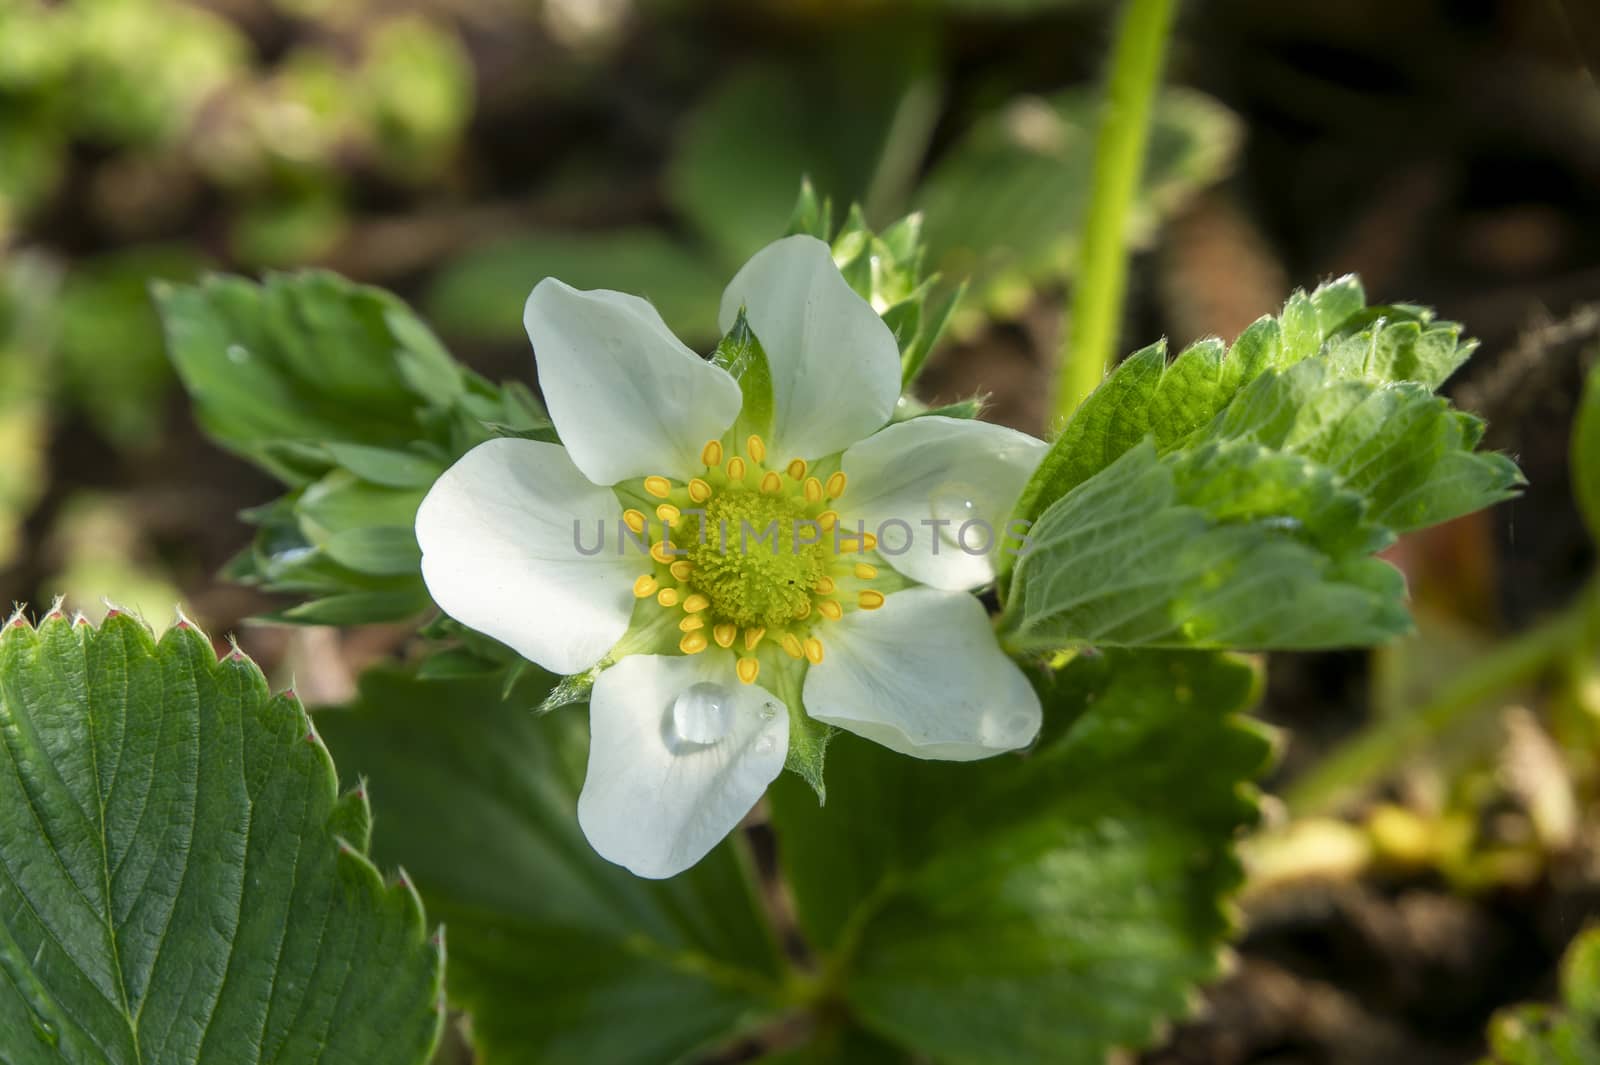 Close up on the white flower of a strawberry plant growing outdoors in the garden with drops of water on the petals